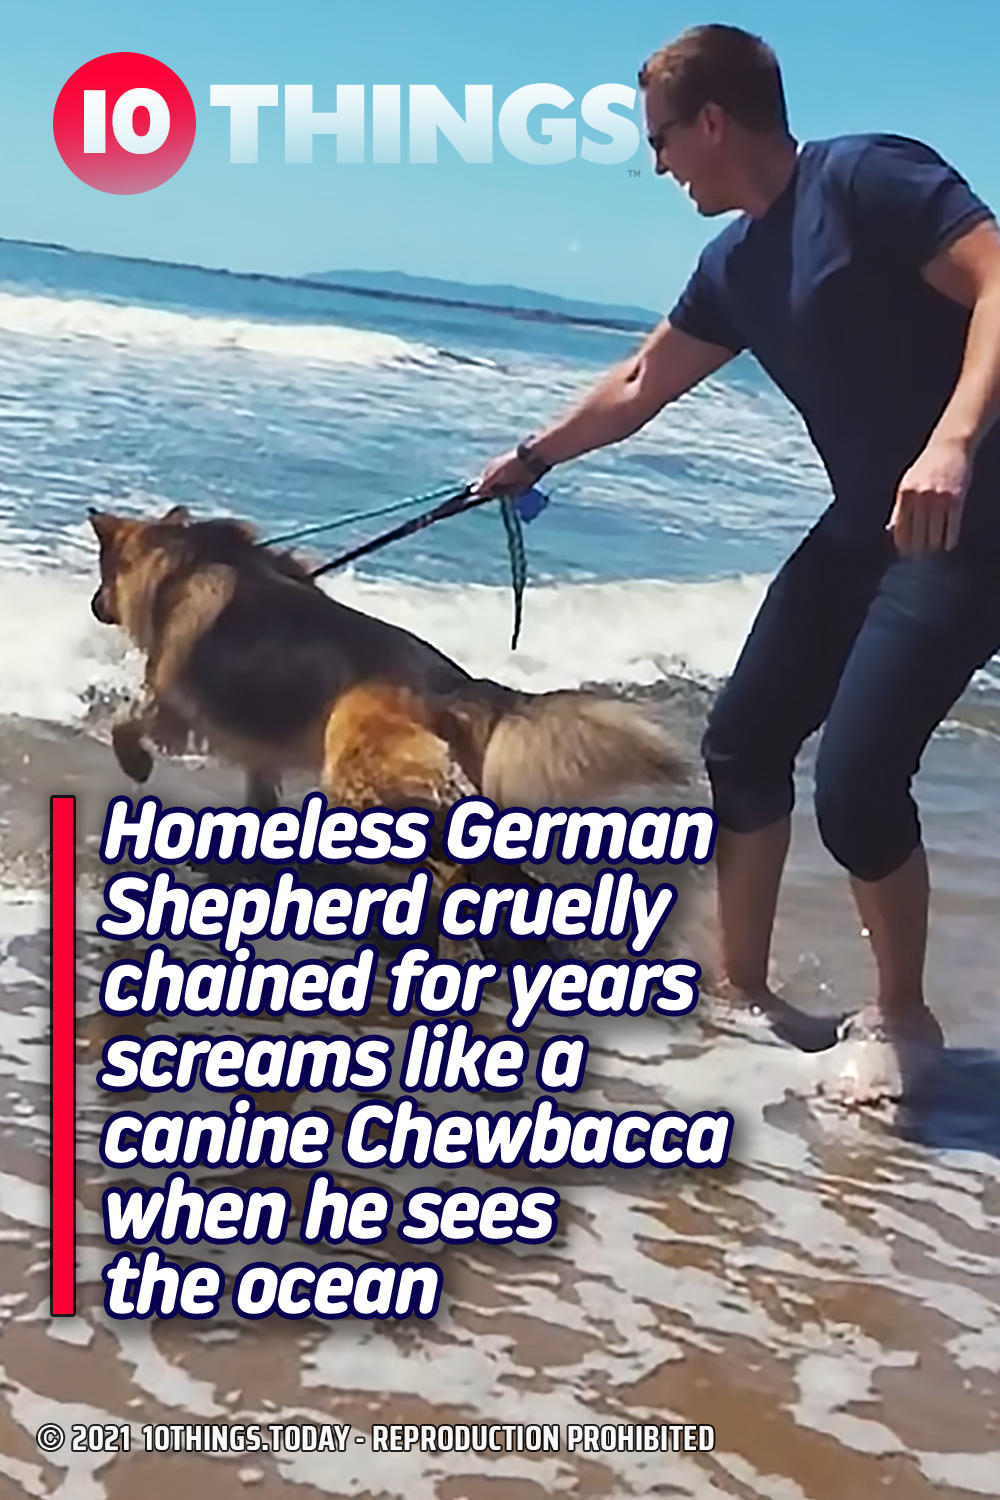 Homeless German Shepherd cruelly chained for years screams like a canine Chewbacca when he sees the ocean